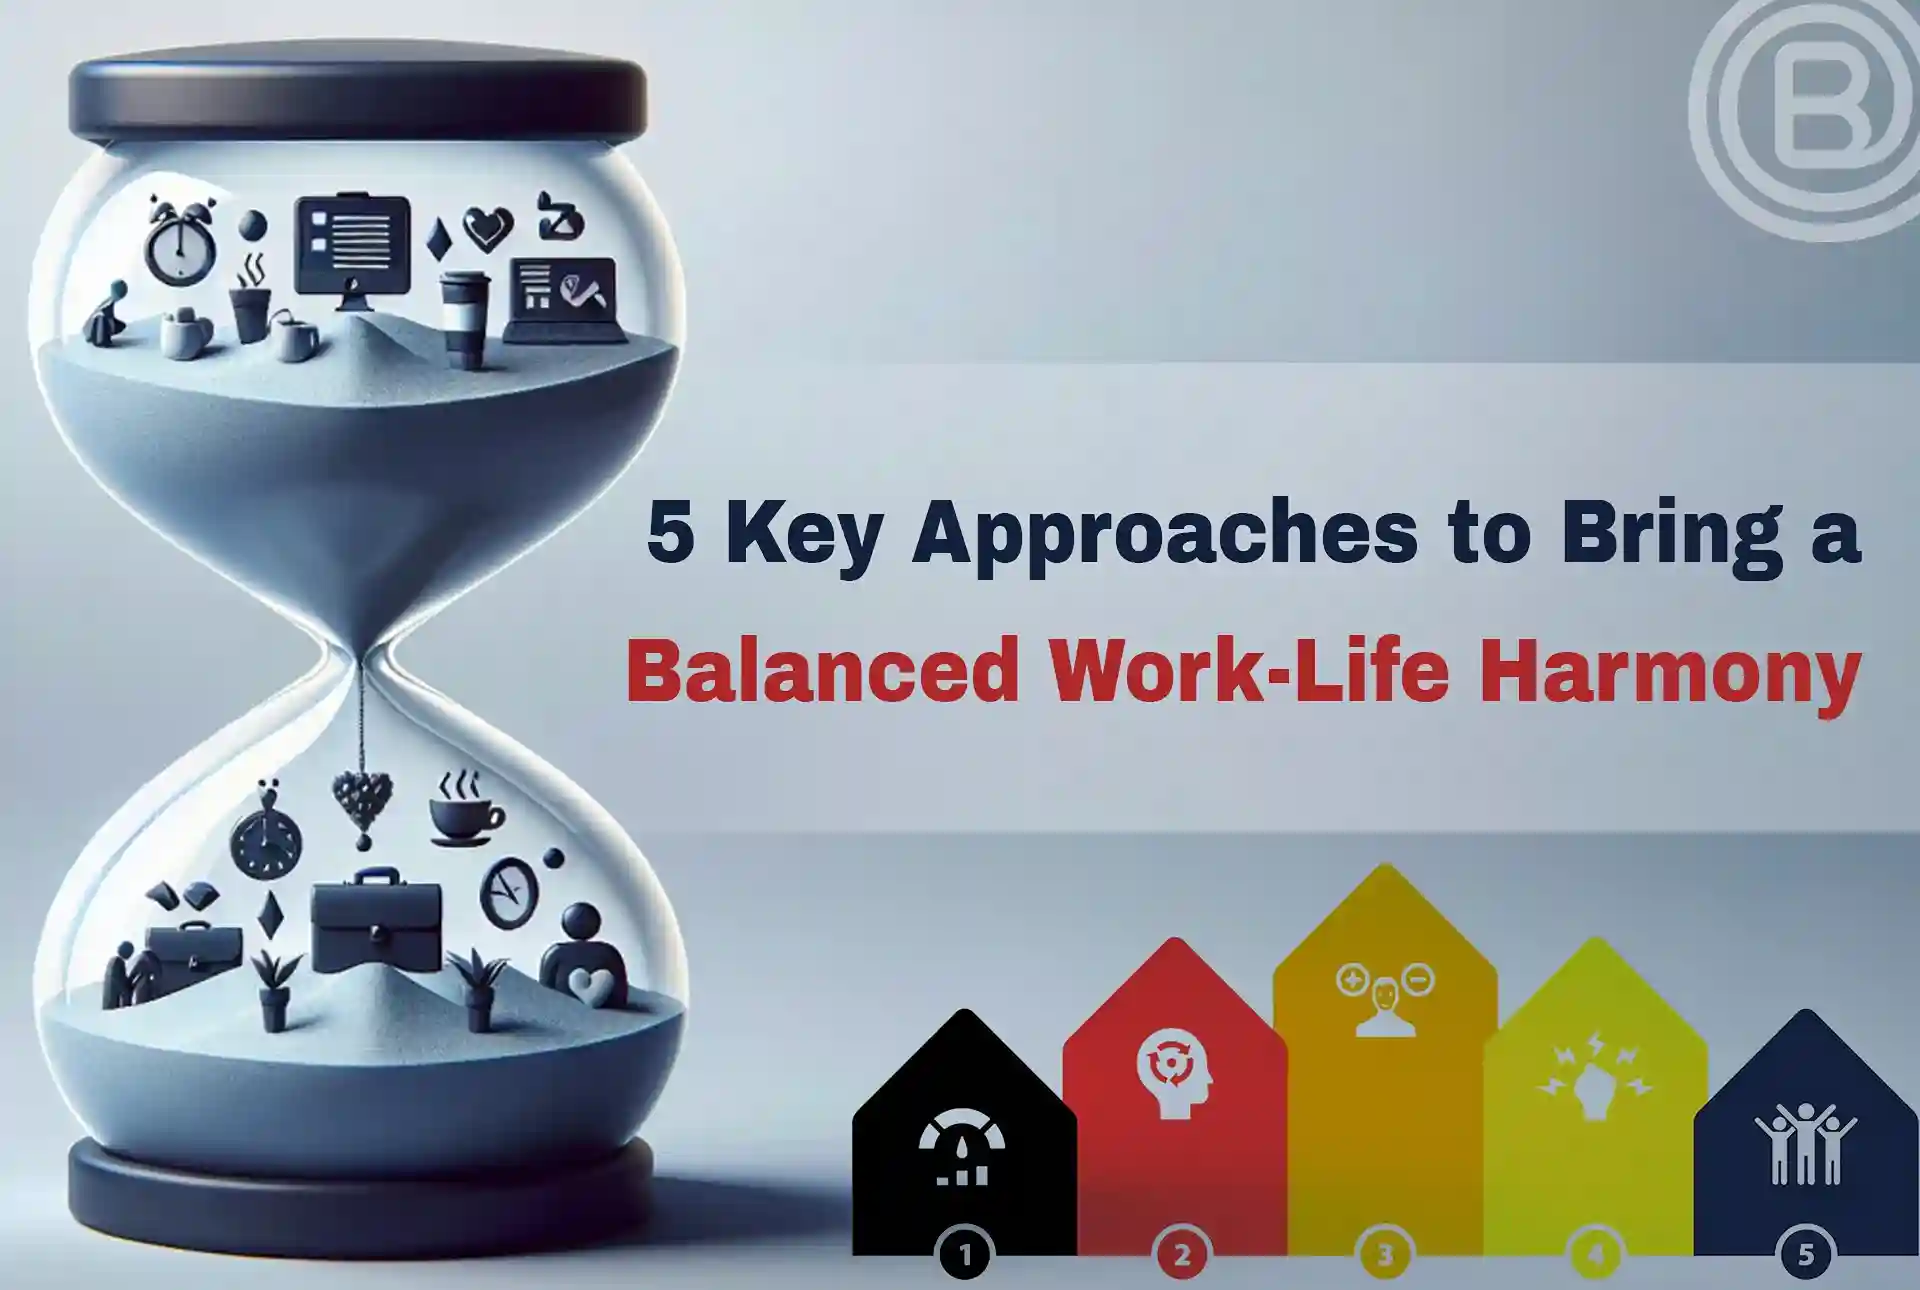 5 Key Approaches to Bring a Balanced Work-Life Harmony